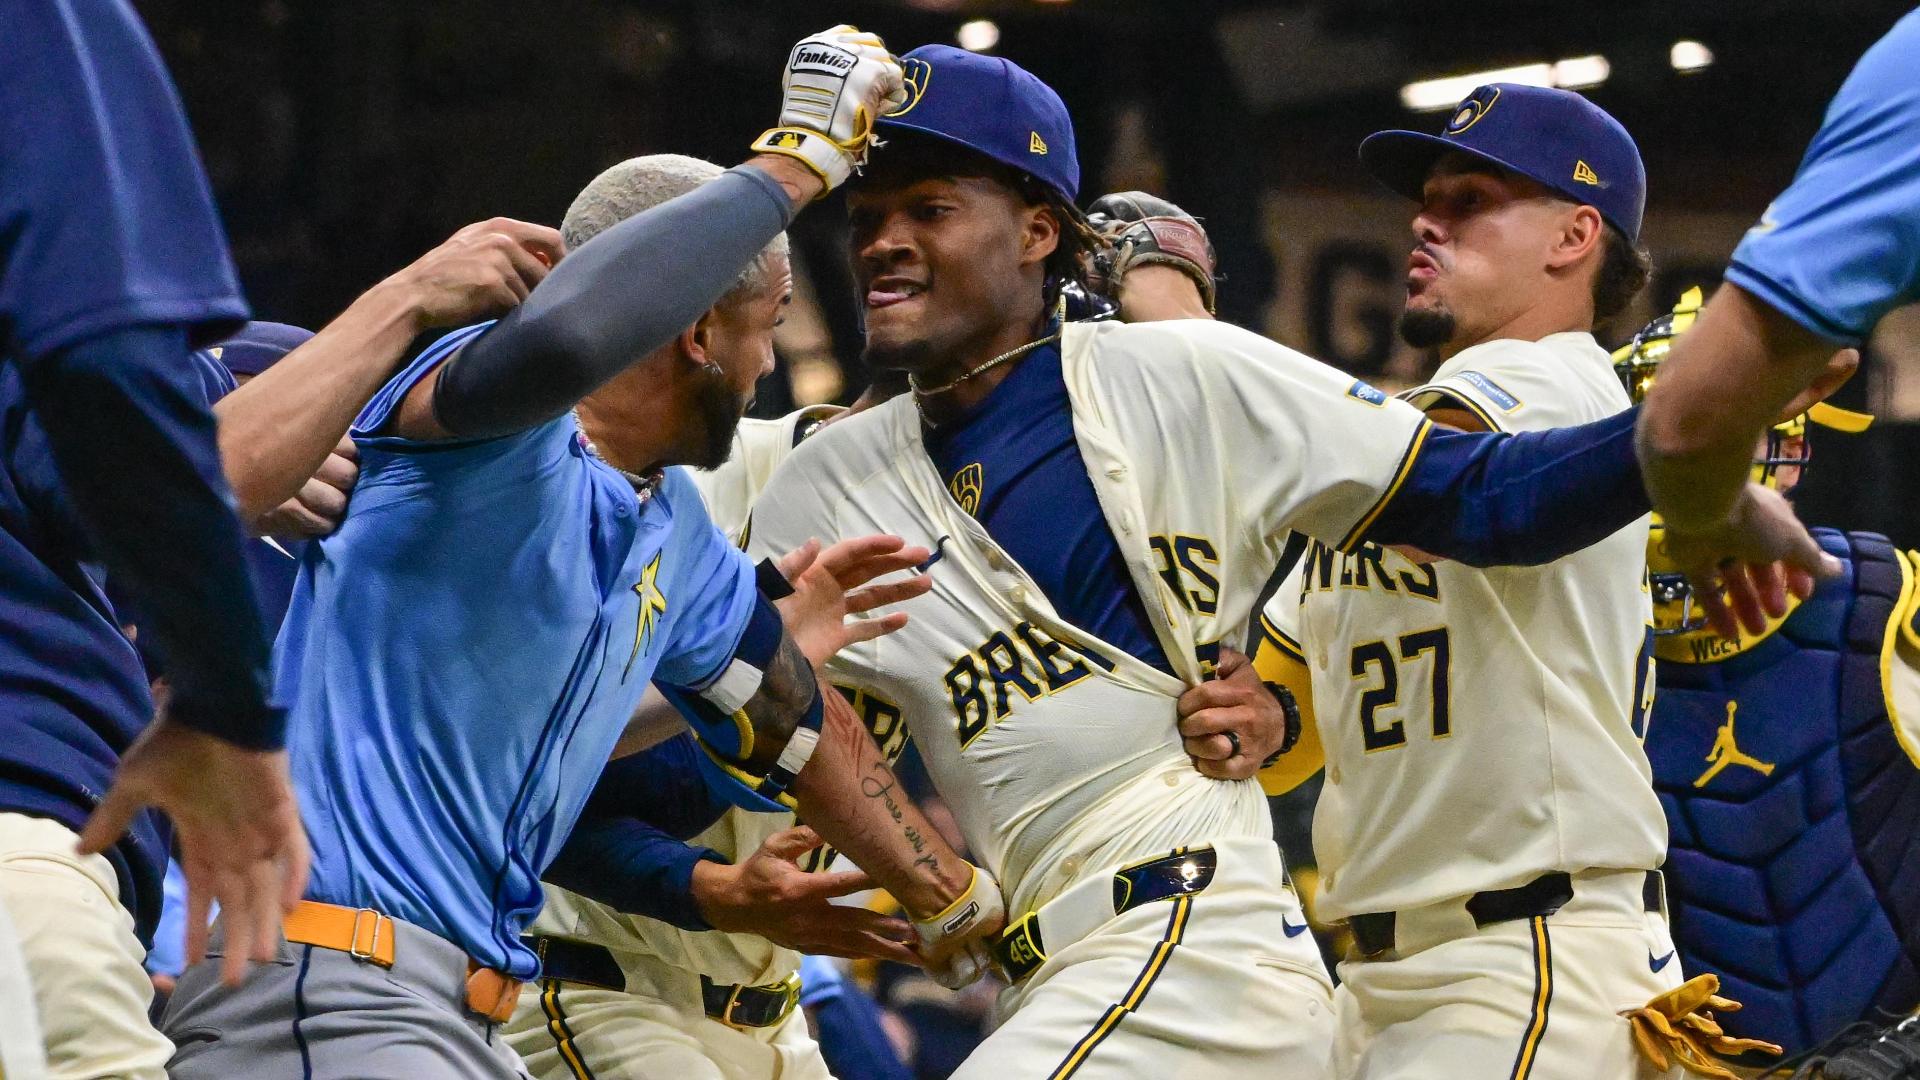 Brawl erupts in Milwaukee between Brewers and Rays